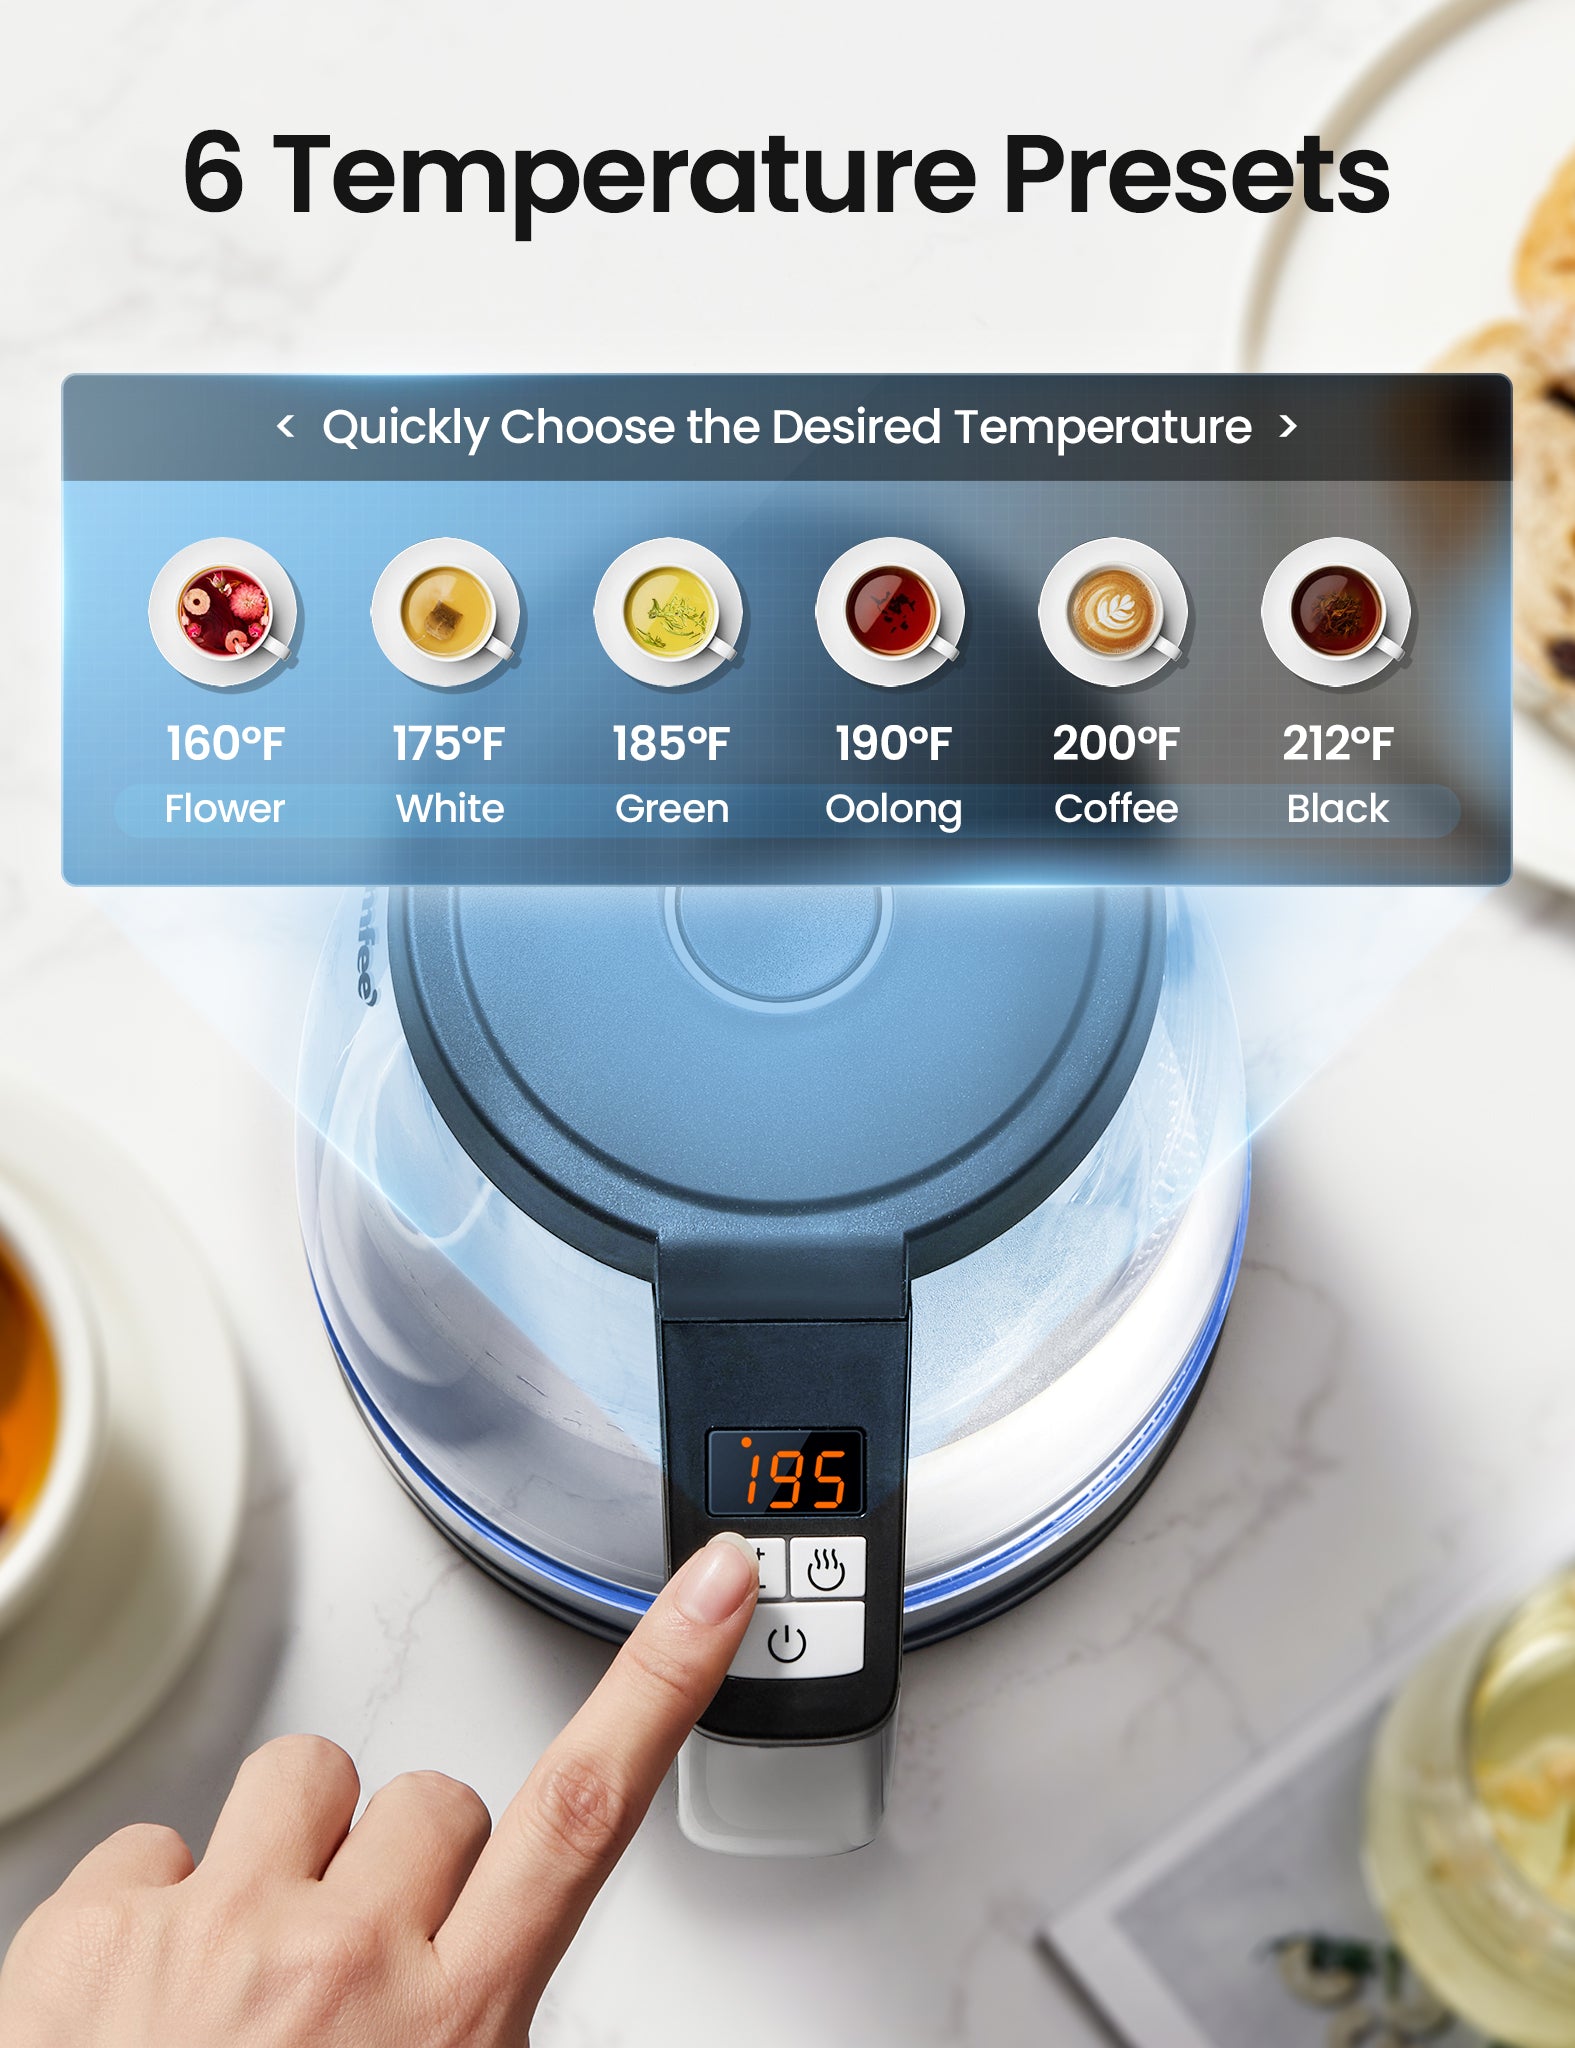 Our glass kettle offers 6 temperature presets which can be easy control